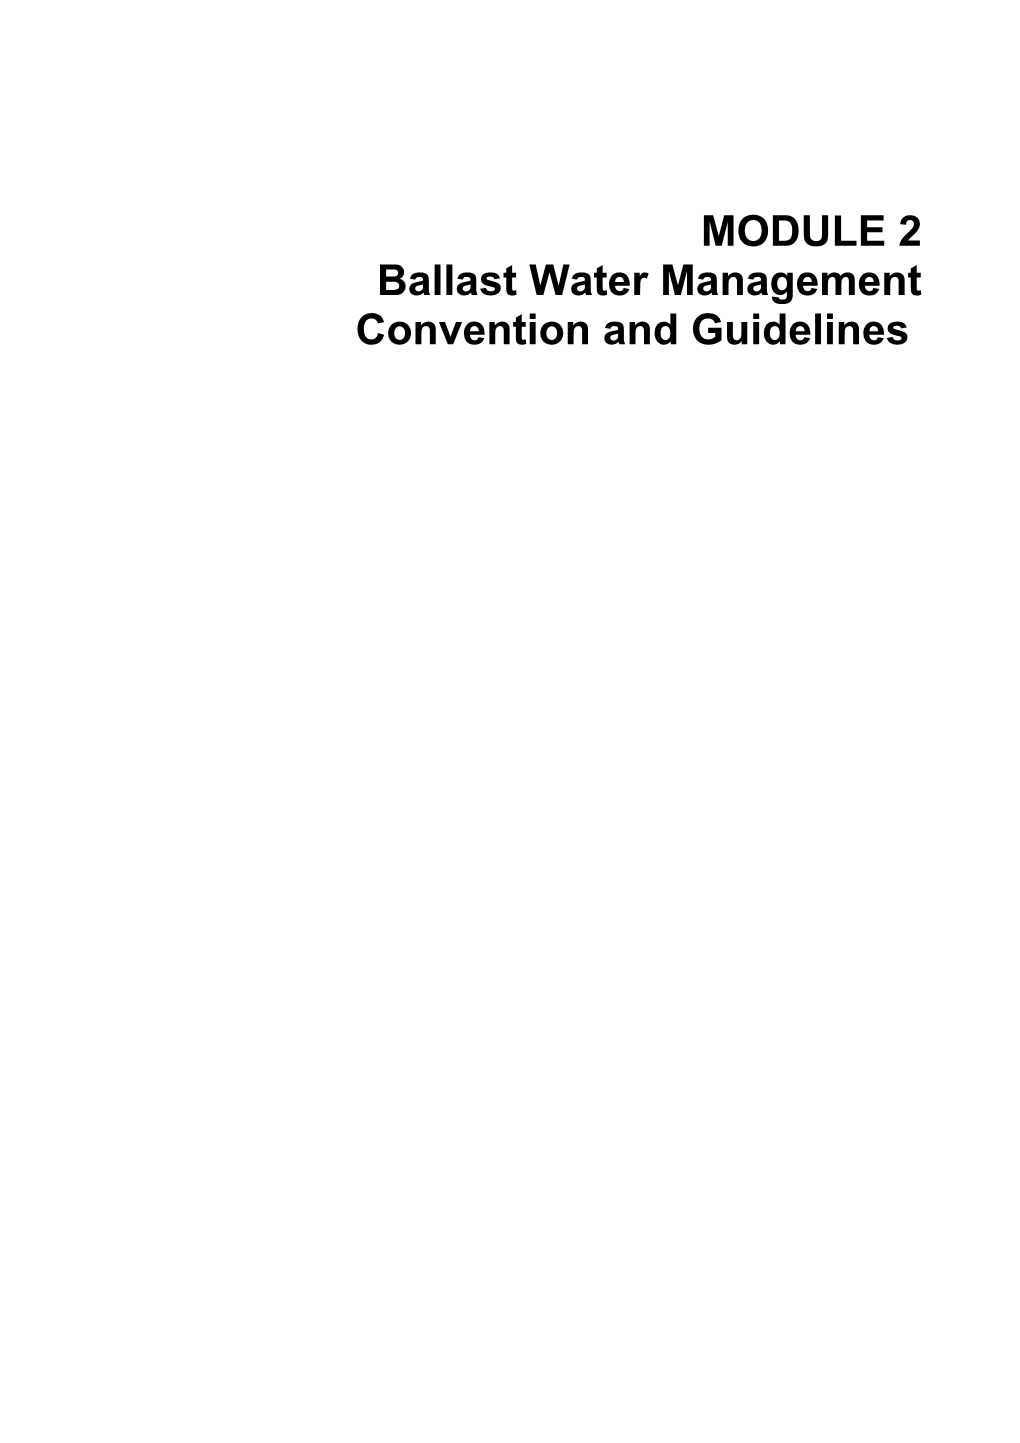 Ballast Water Management Convention and Guidelines